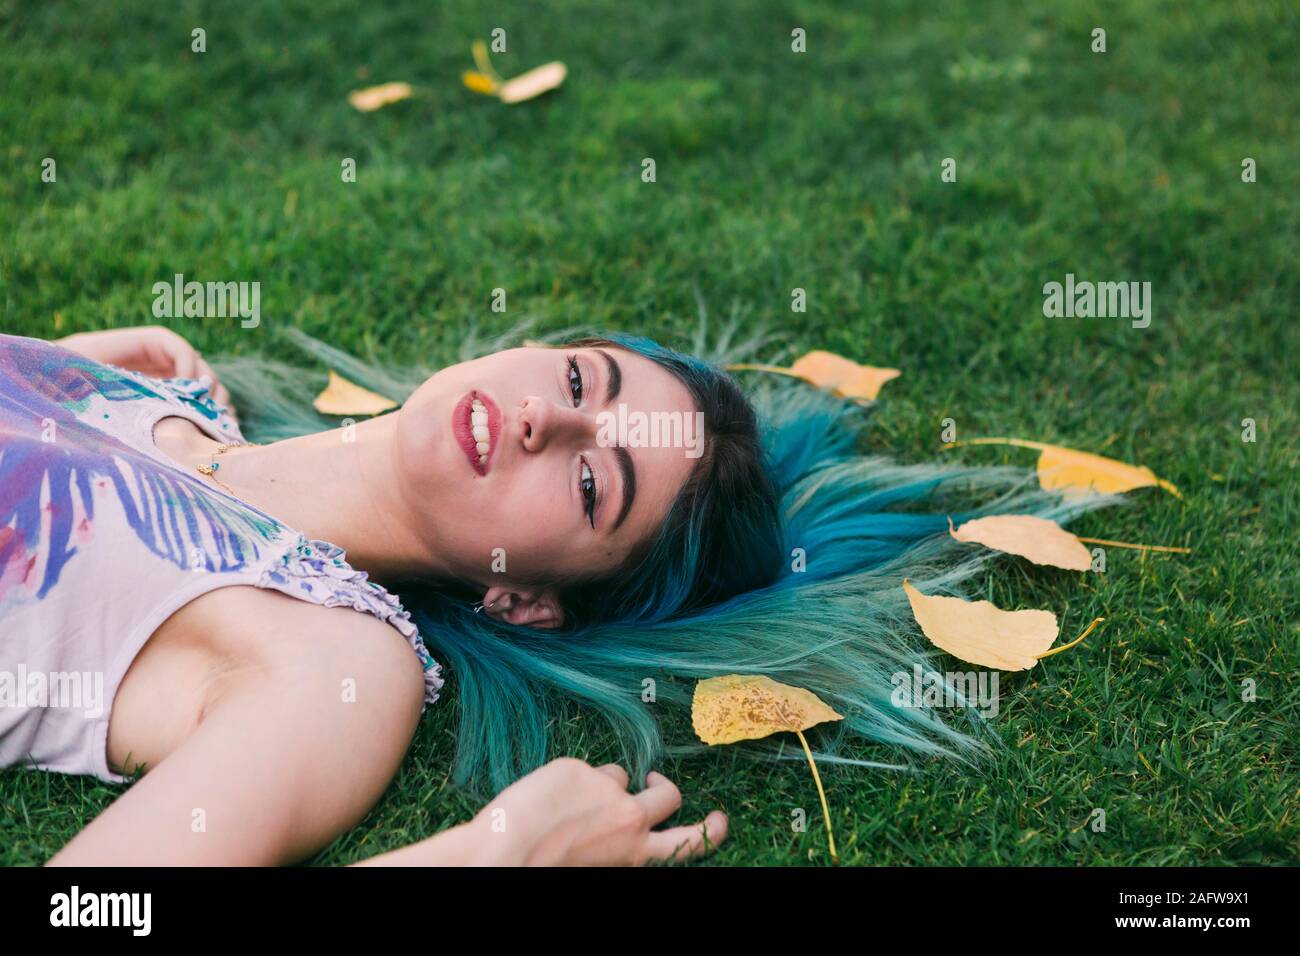 Portrait serene young woman with blue hair laying in grass with autumn leaves Stock Photo